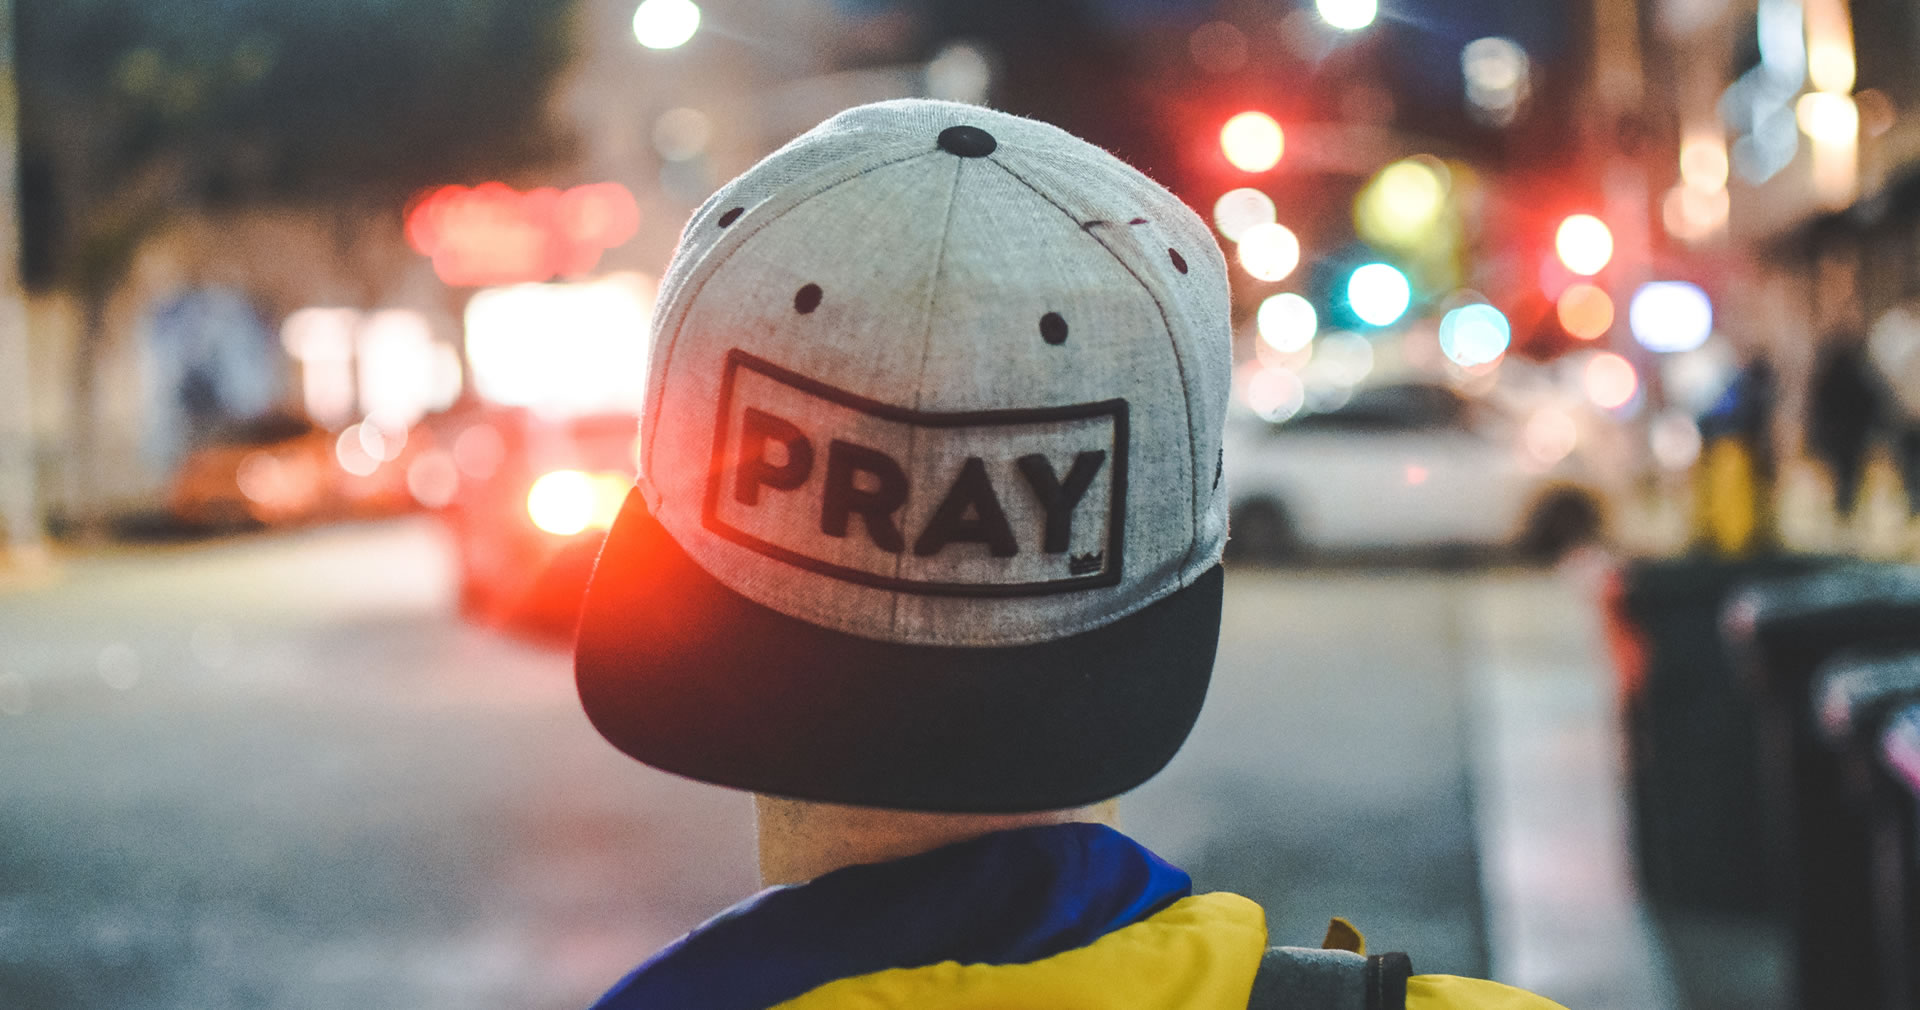 discover how to pray